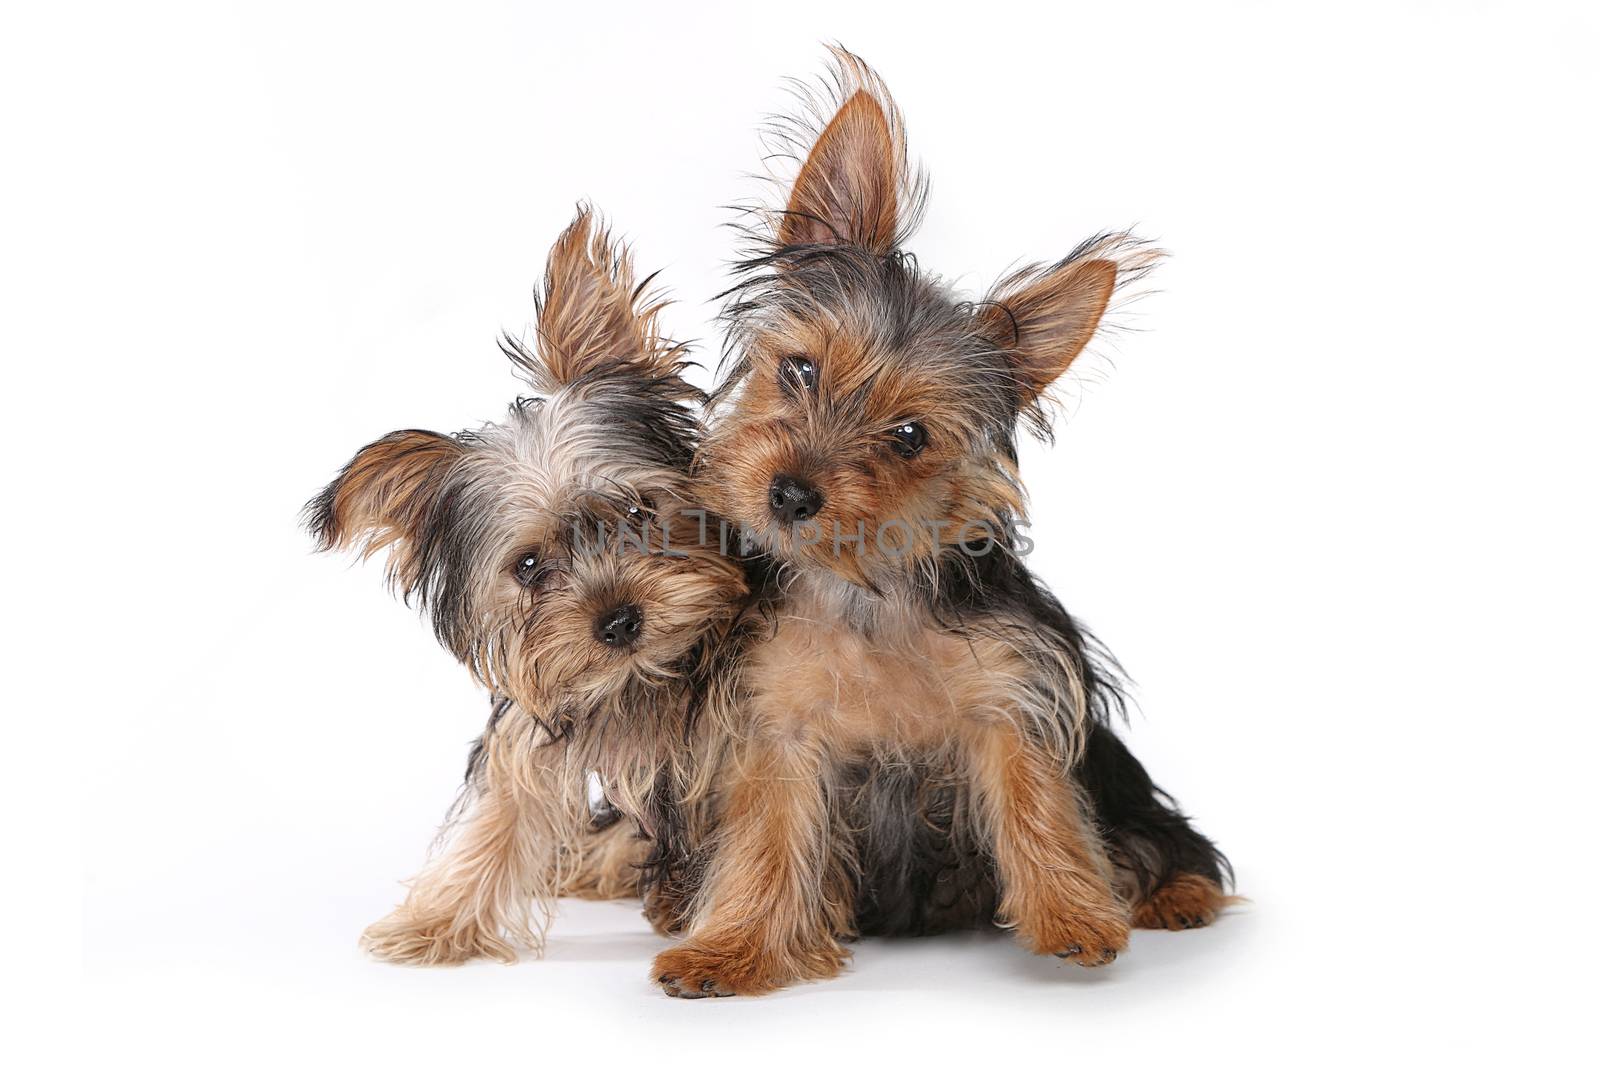 Tiny Yorkshire Terrier Puppies Sitting on White Background  